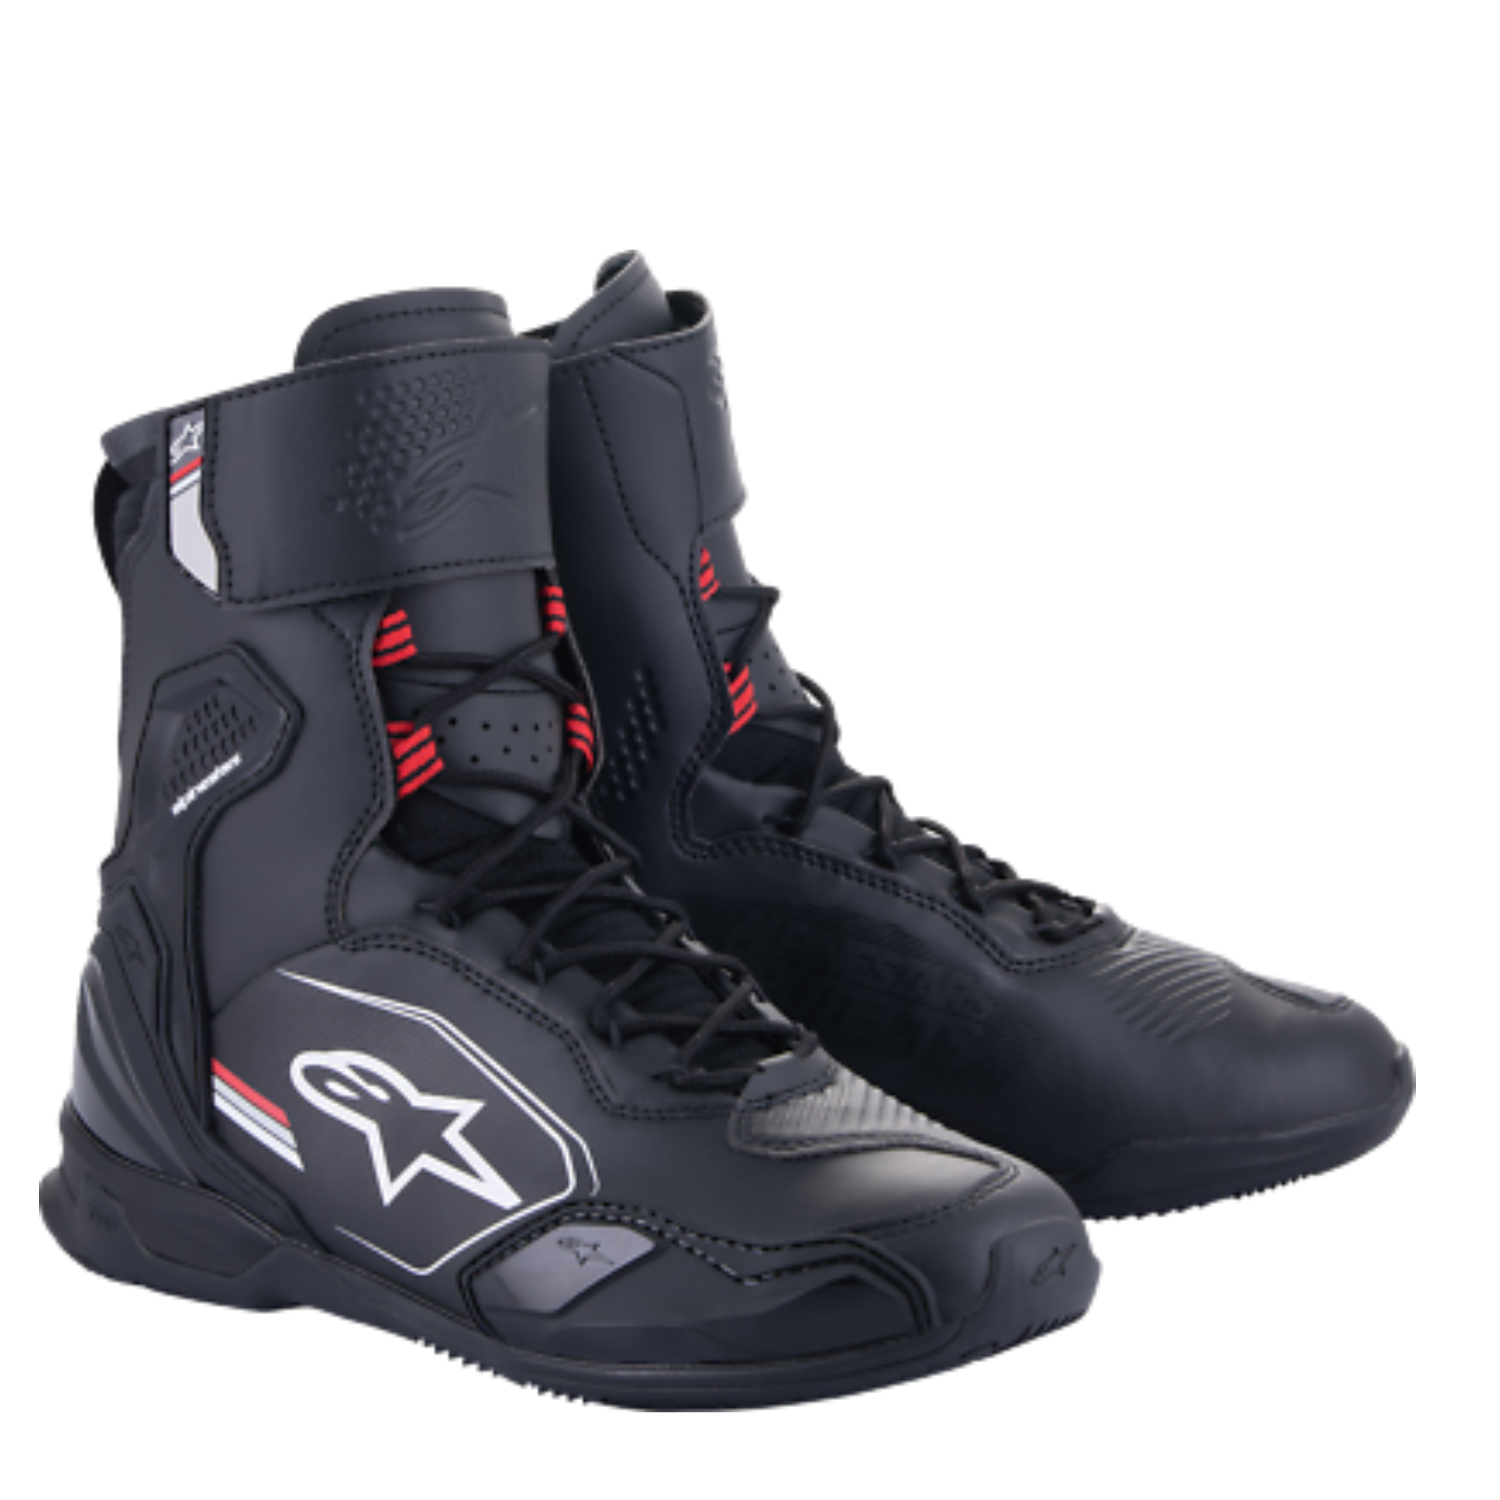 Image of Alpinestars Superfaster Shoes Black Gray Bright Red Size US 135 ID 8059347260884